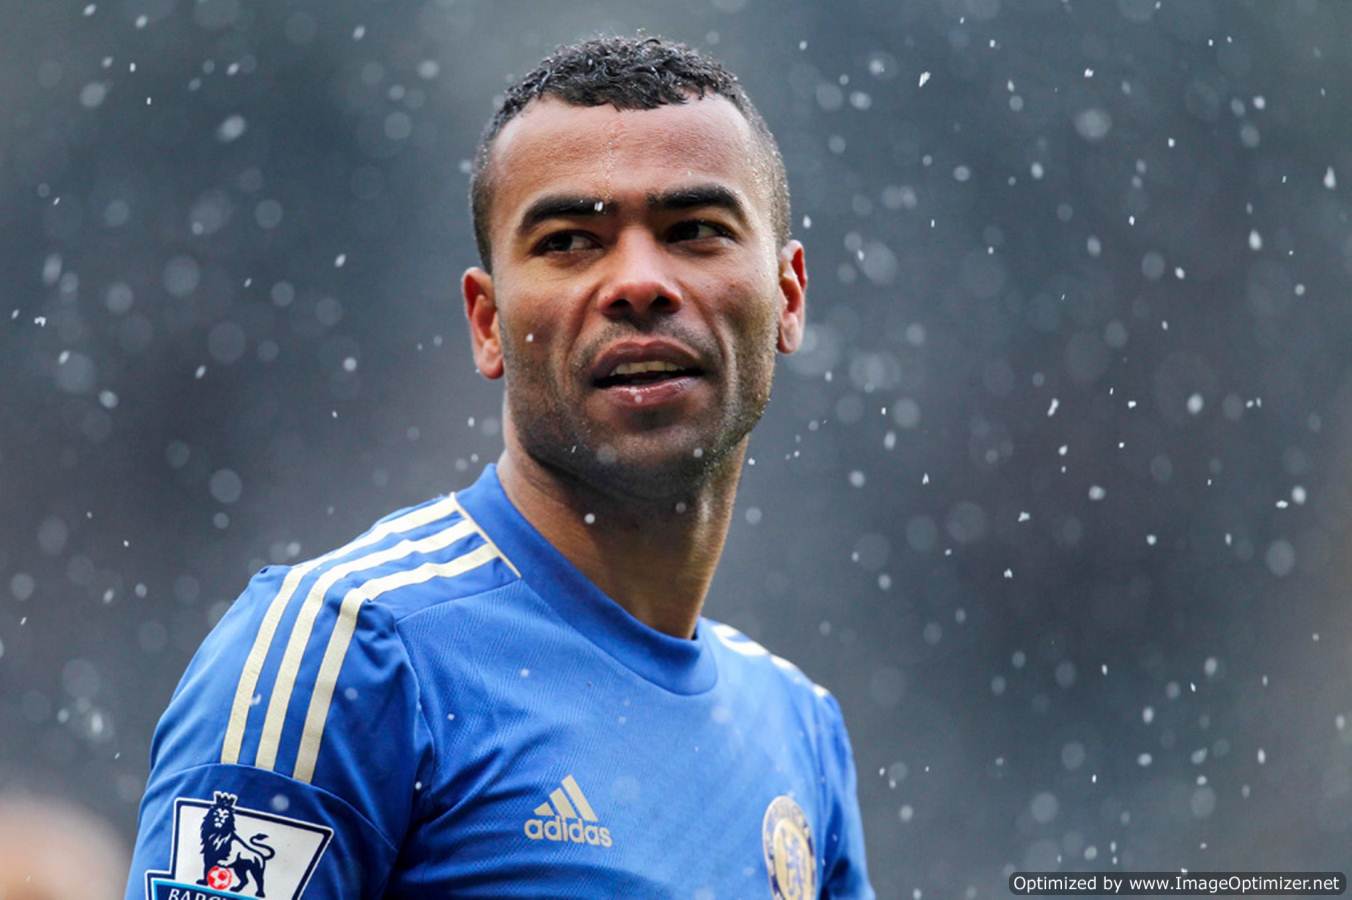 Ashley Cole Soccer Player Biography and Pictures | Sports Club Blog1352 x 900